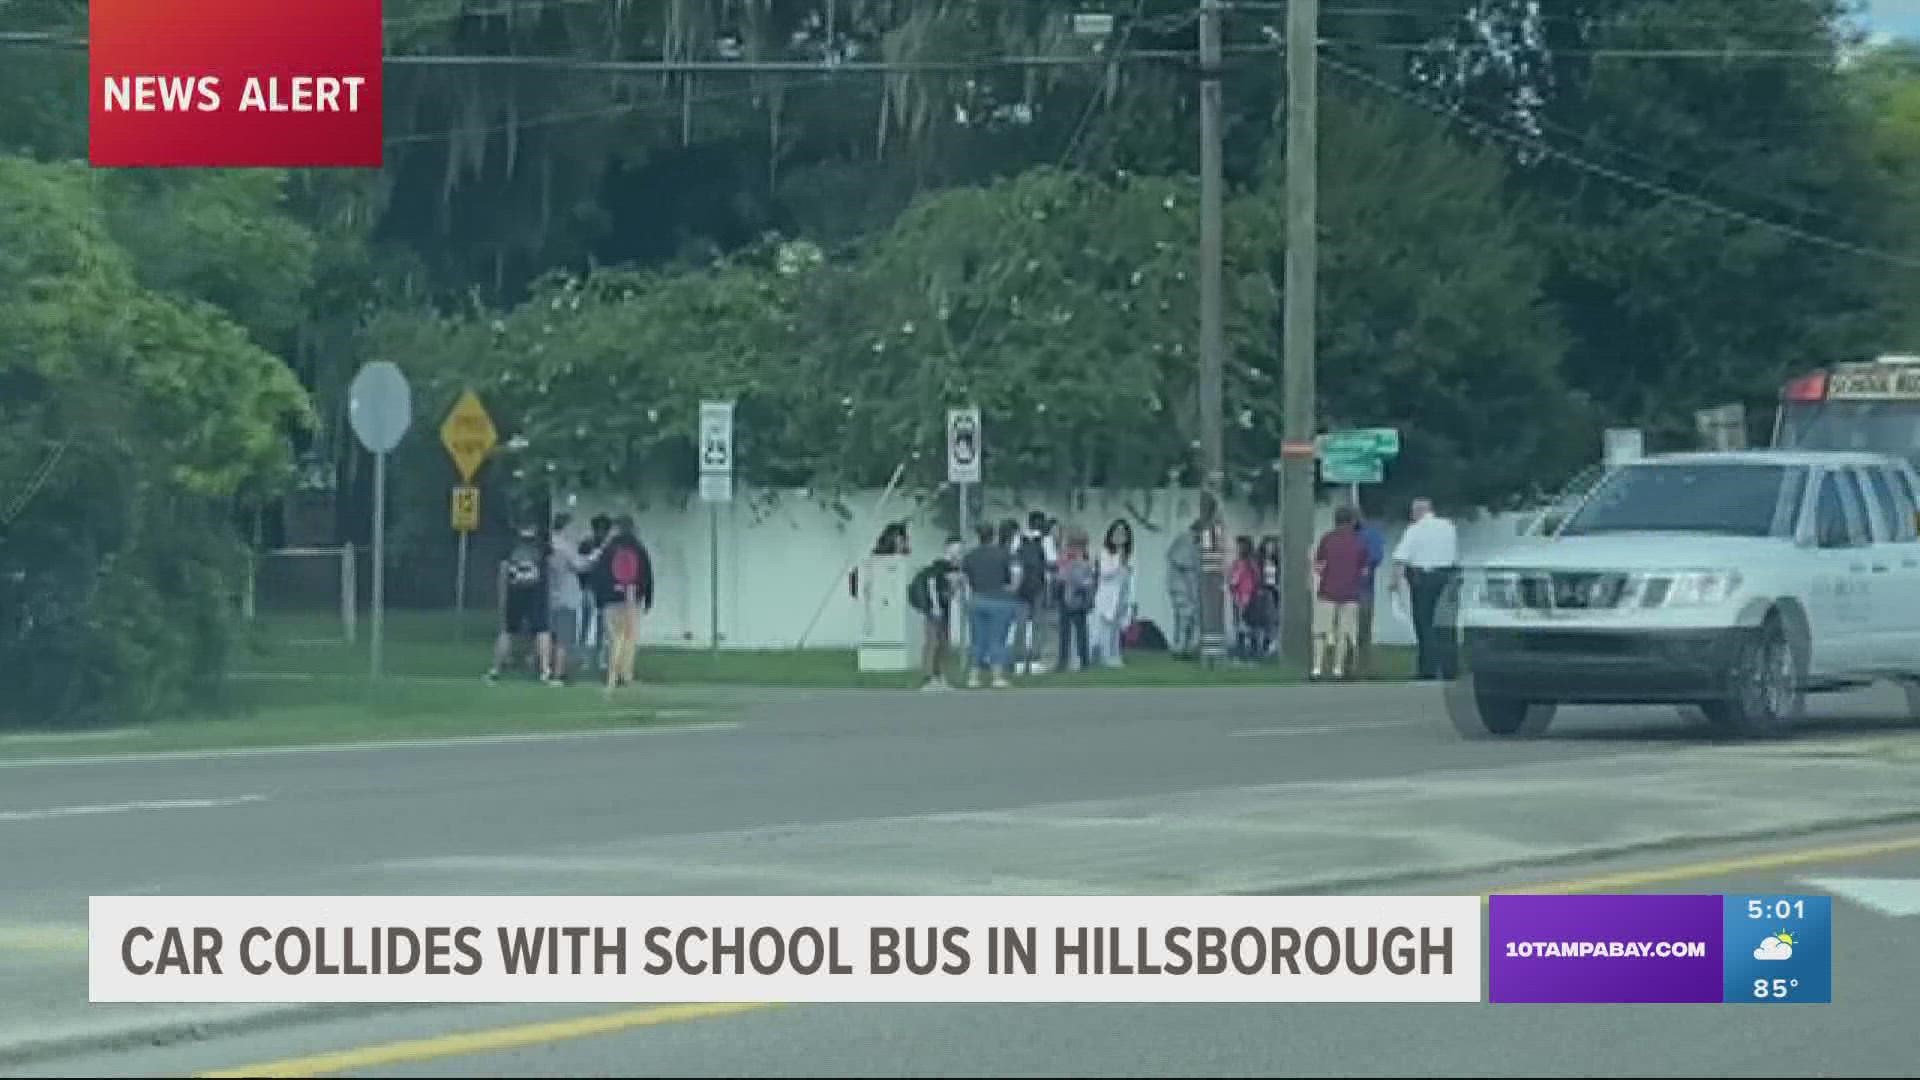 Students were seen standing outside of the school bus while deputies responded to the crash.